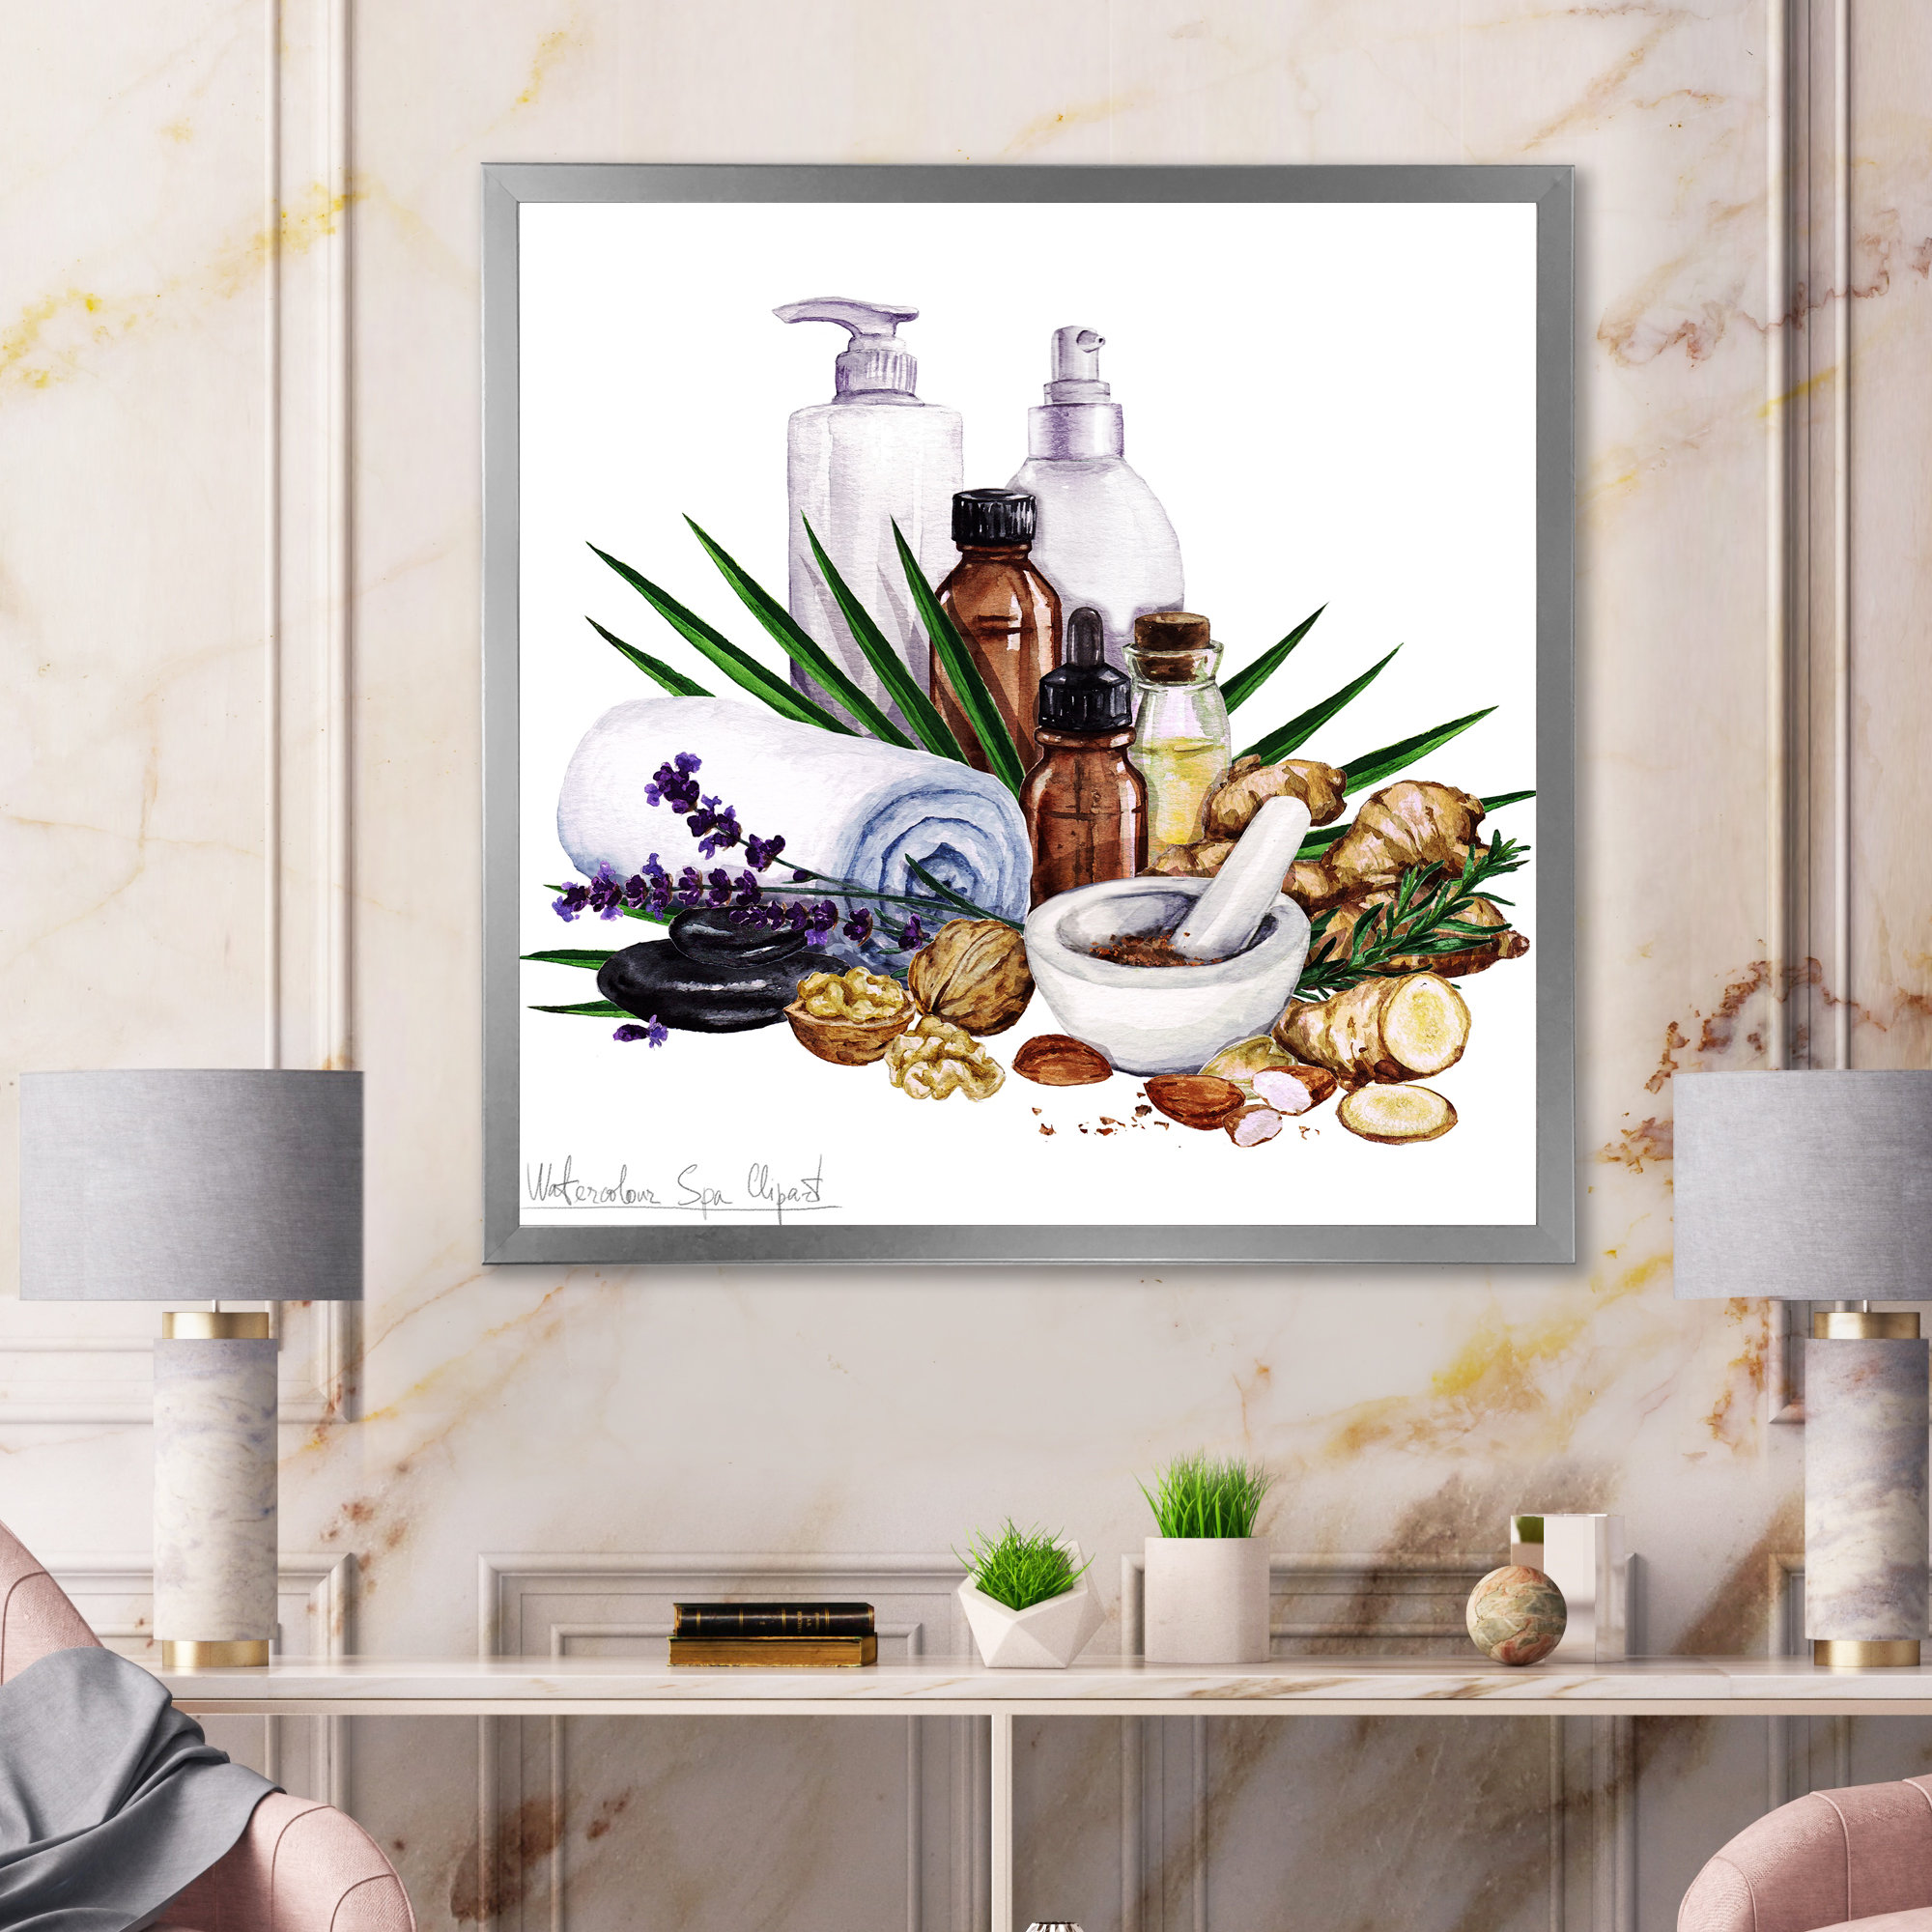  Purple Zen Wall Art Spa Bathroom Decor Canvas Prints Lavender  Candles Stone Painting Pictures Wall Decor Framed Modern Artwork Decor for  Bathroom Living Room 16x20: Posters & Prints